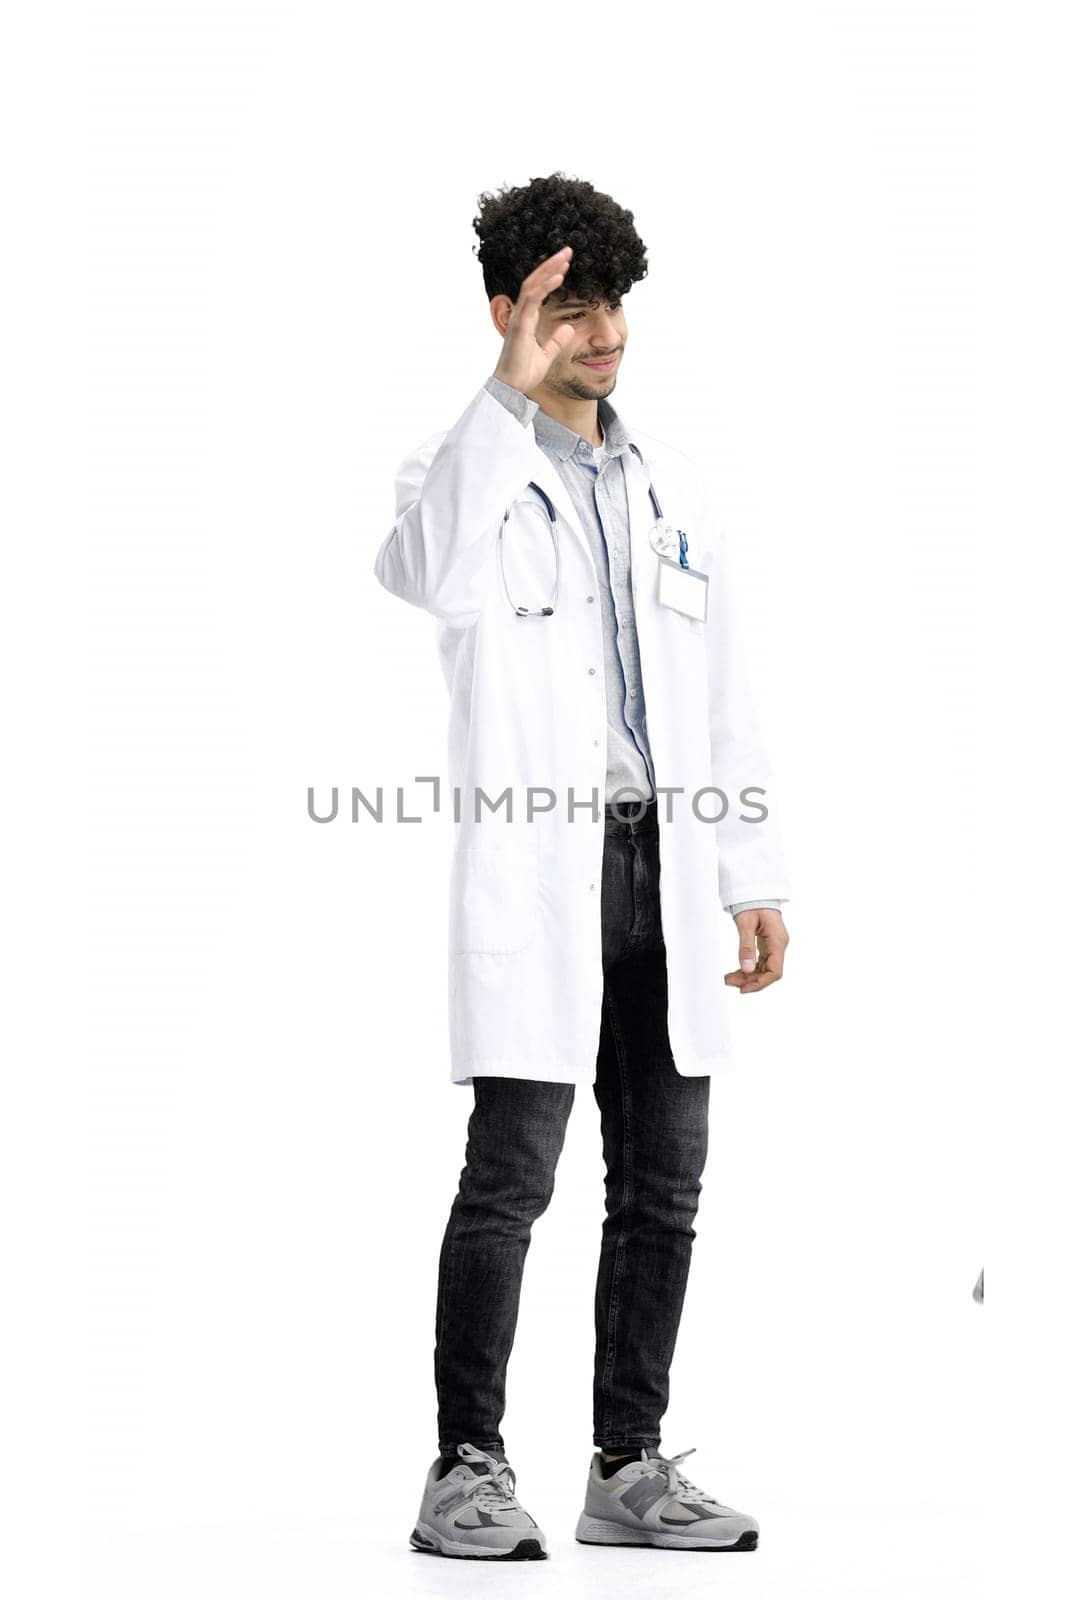 A male doctor, full-length, on a white background, waving his hand.